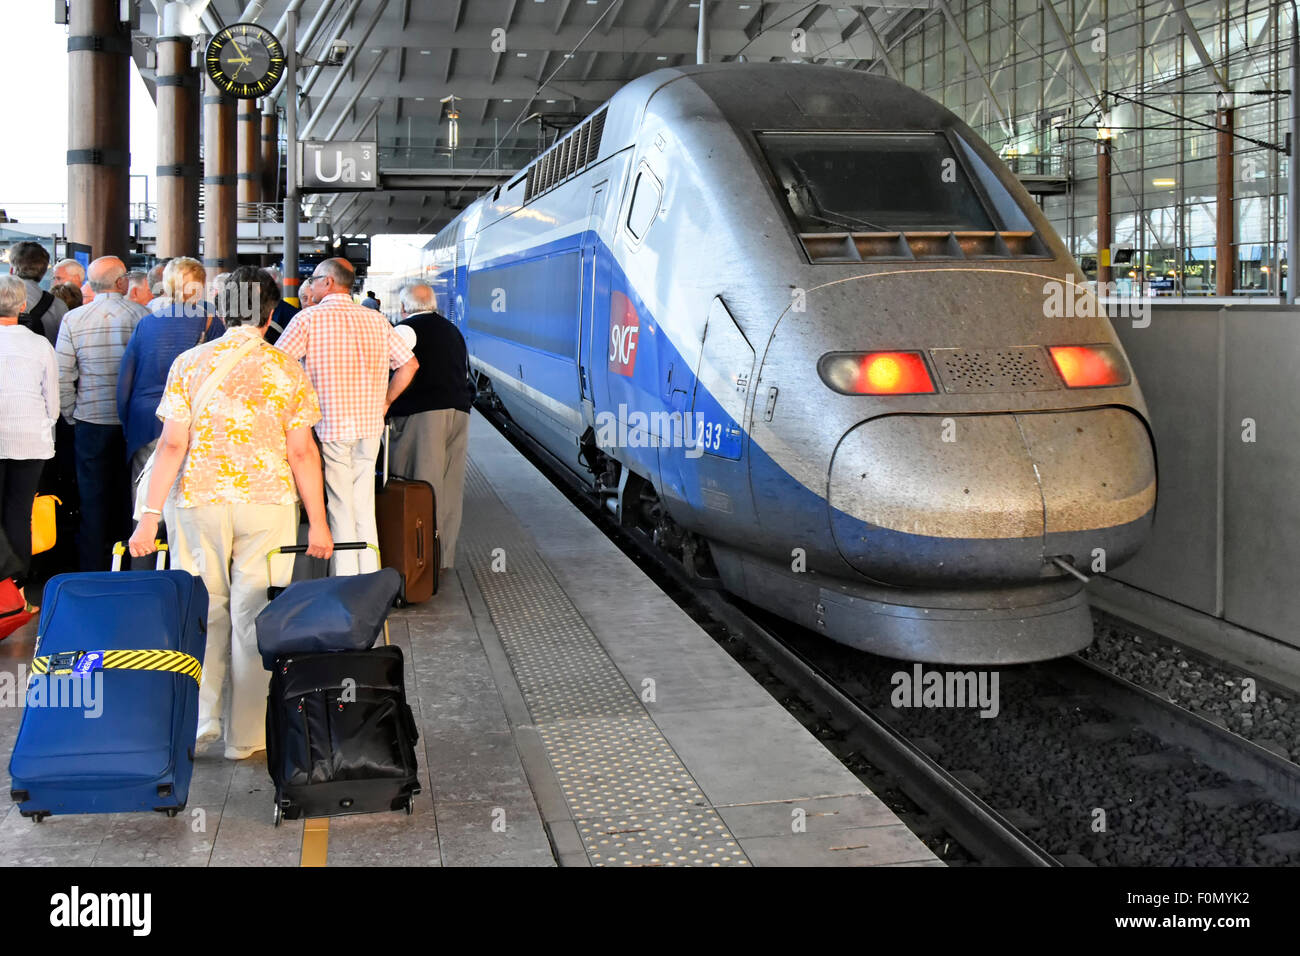 Aix-en-Provence France TGV train station & disembarked holiday passengers with luggage leaving platform as high speed TGV train departs French station Stock Photo